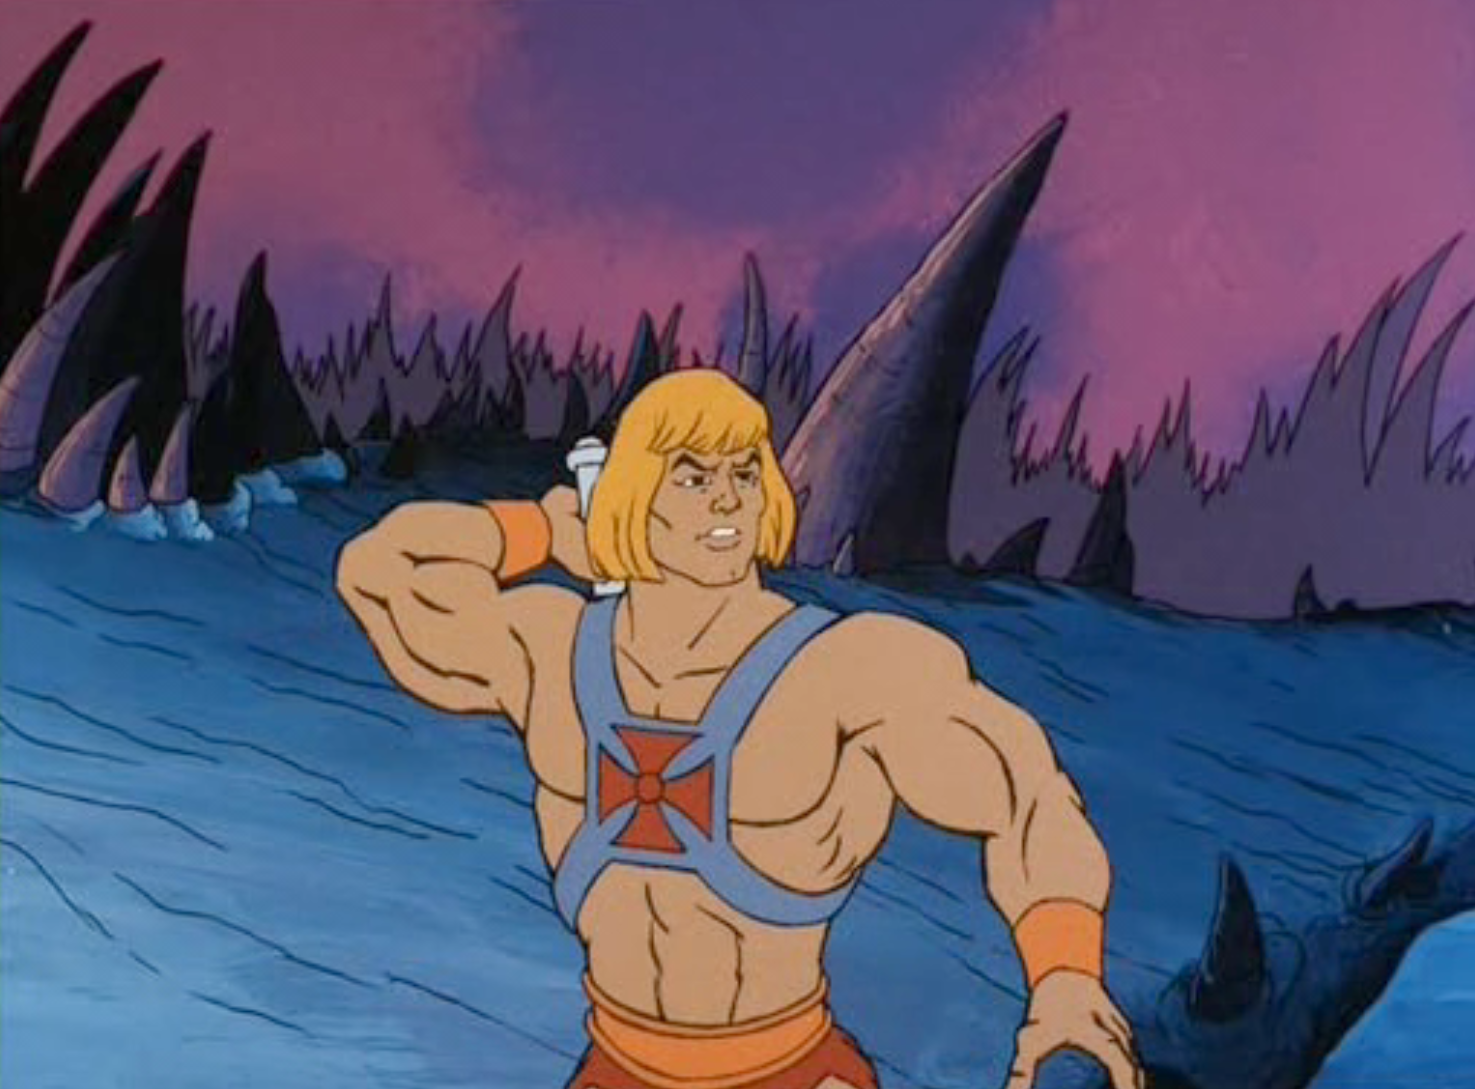 He man new. Химен. Генерал Дункан химен. Шива химен.